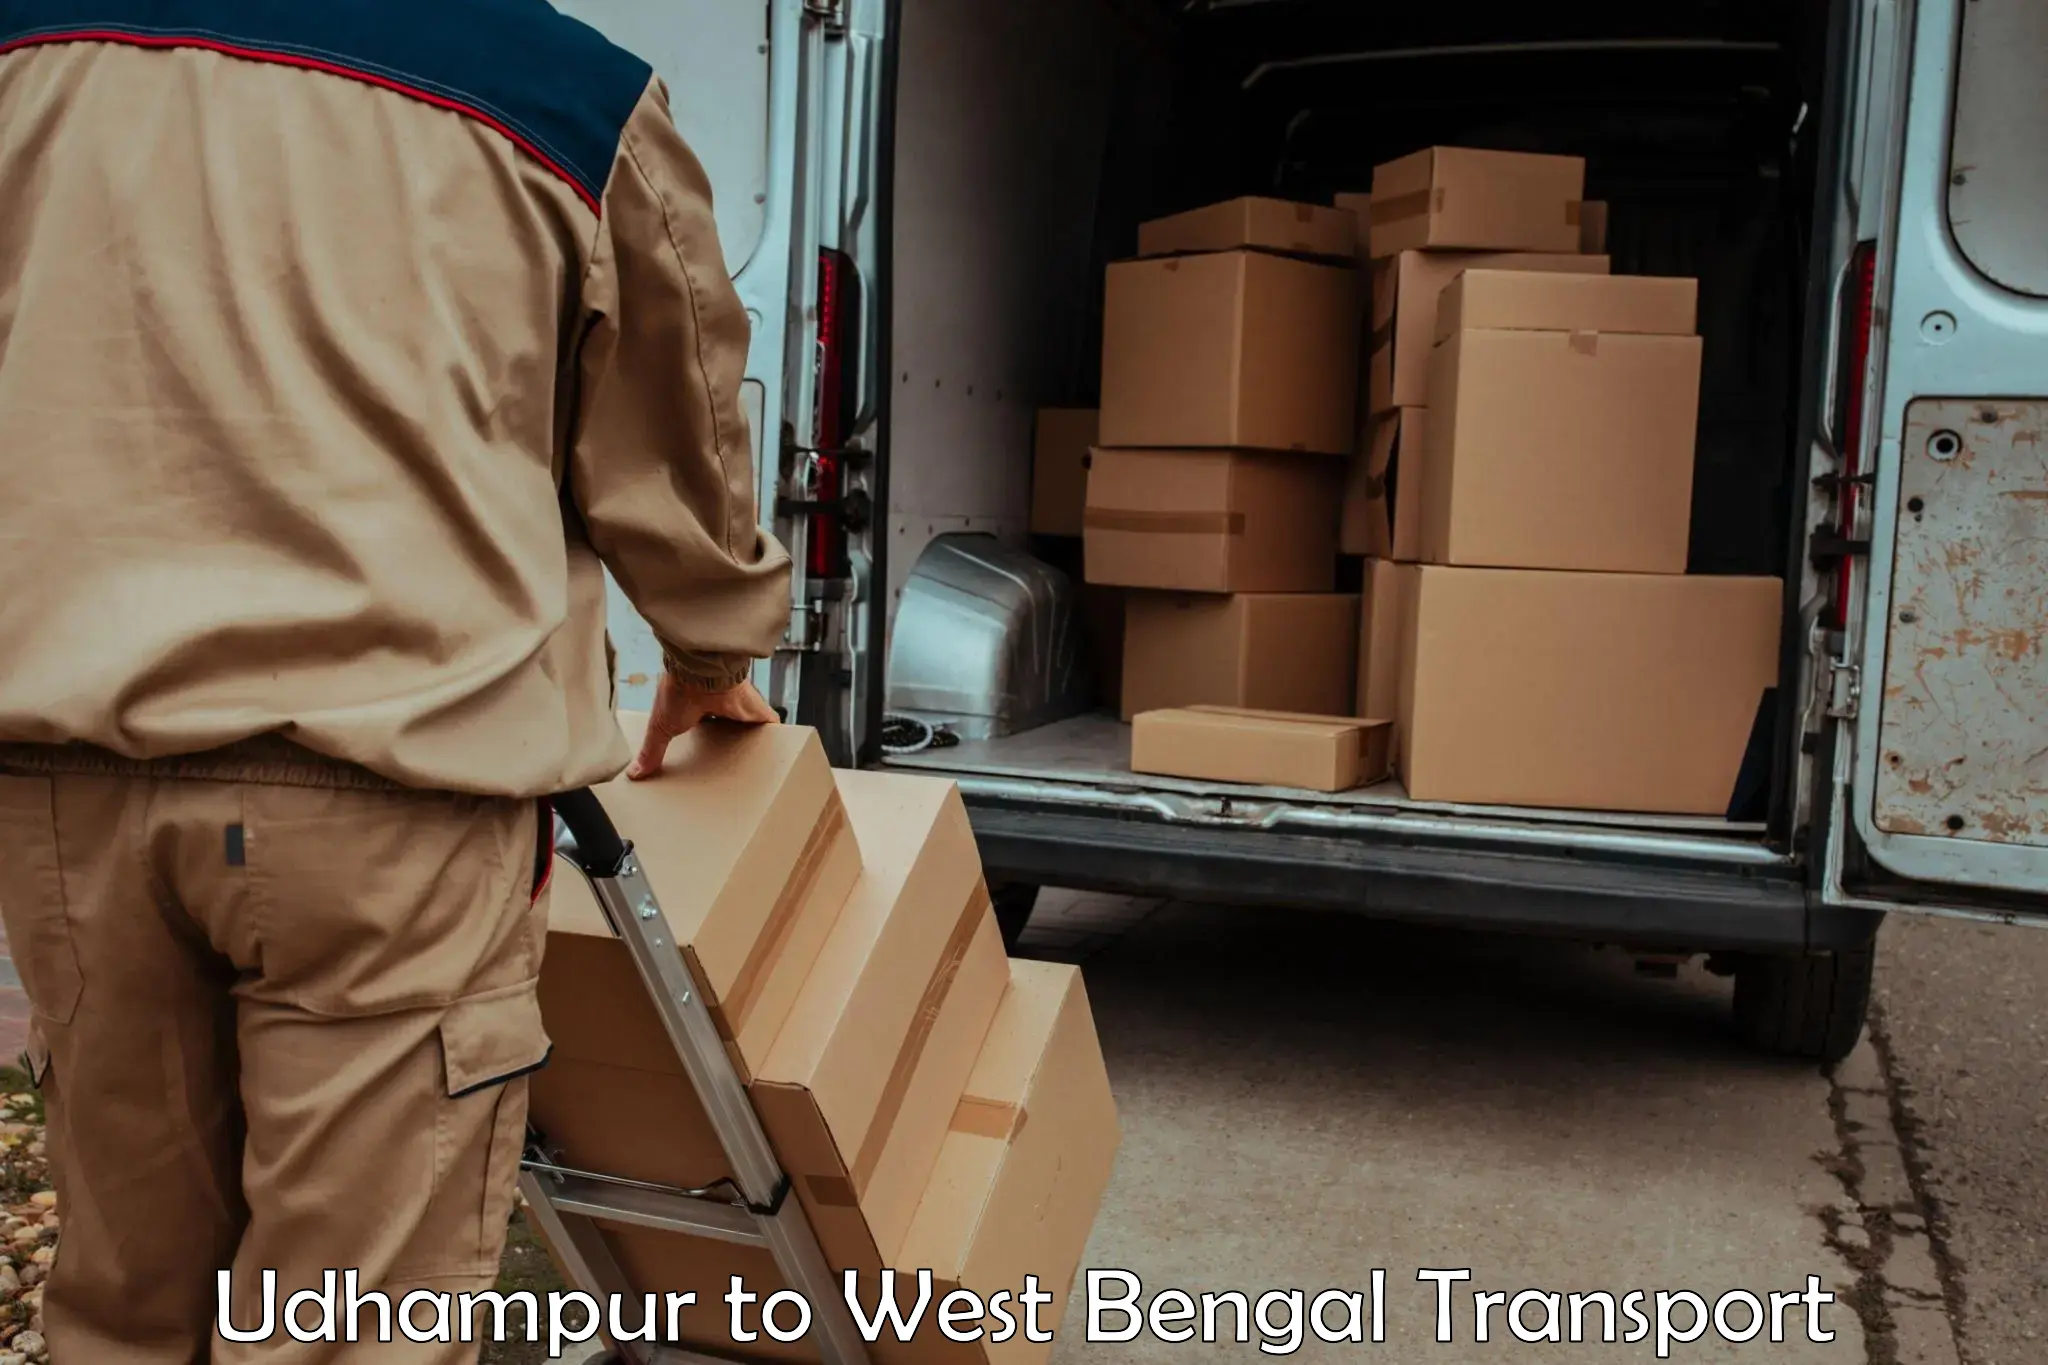 Truck transport companies in India Udhampur to Barasat